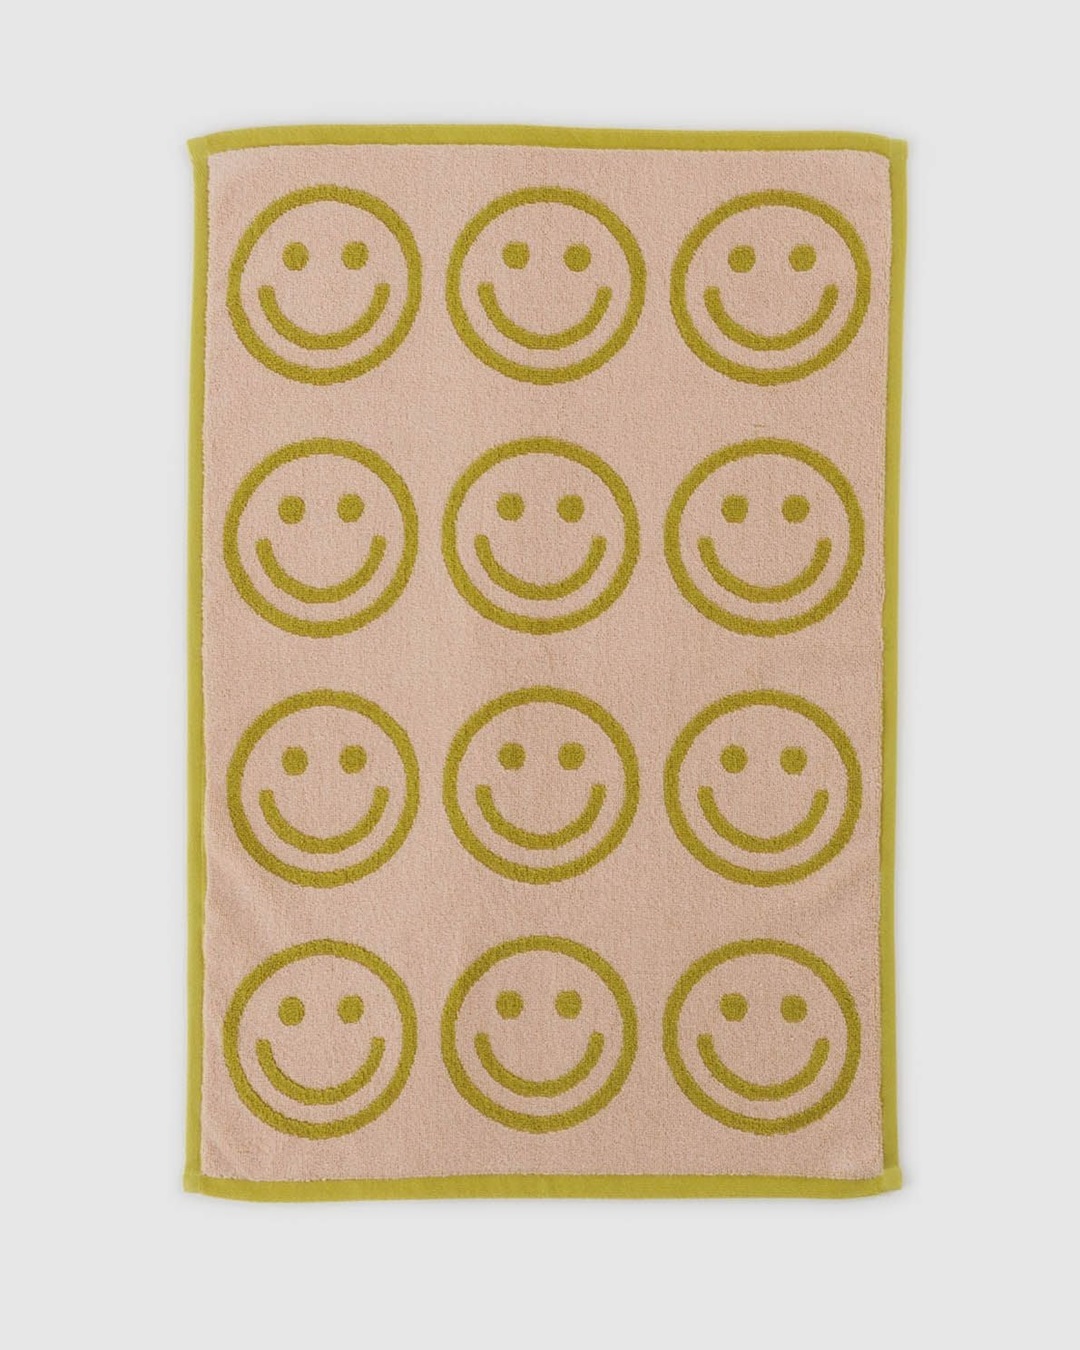 Smiley face pink and green hand towel